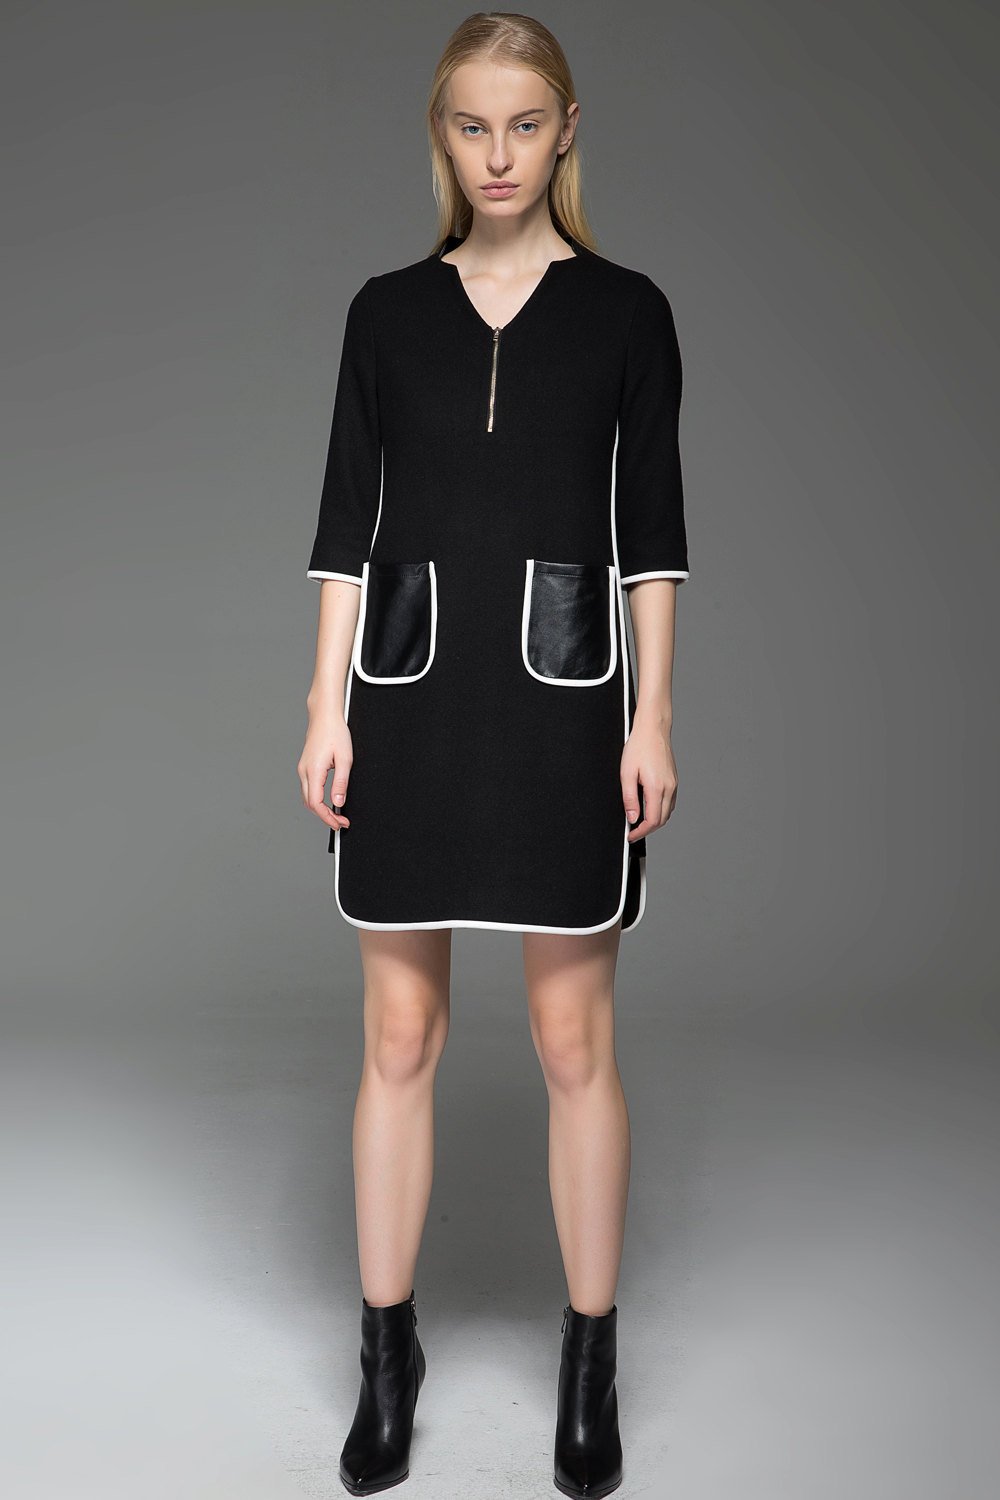 CHANEL Vintage Black Wool Cocktail Dress (2-4) — Seams to Fit Women's  Consignment